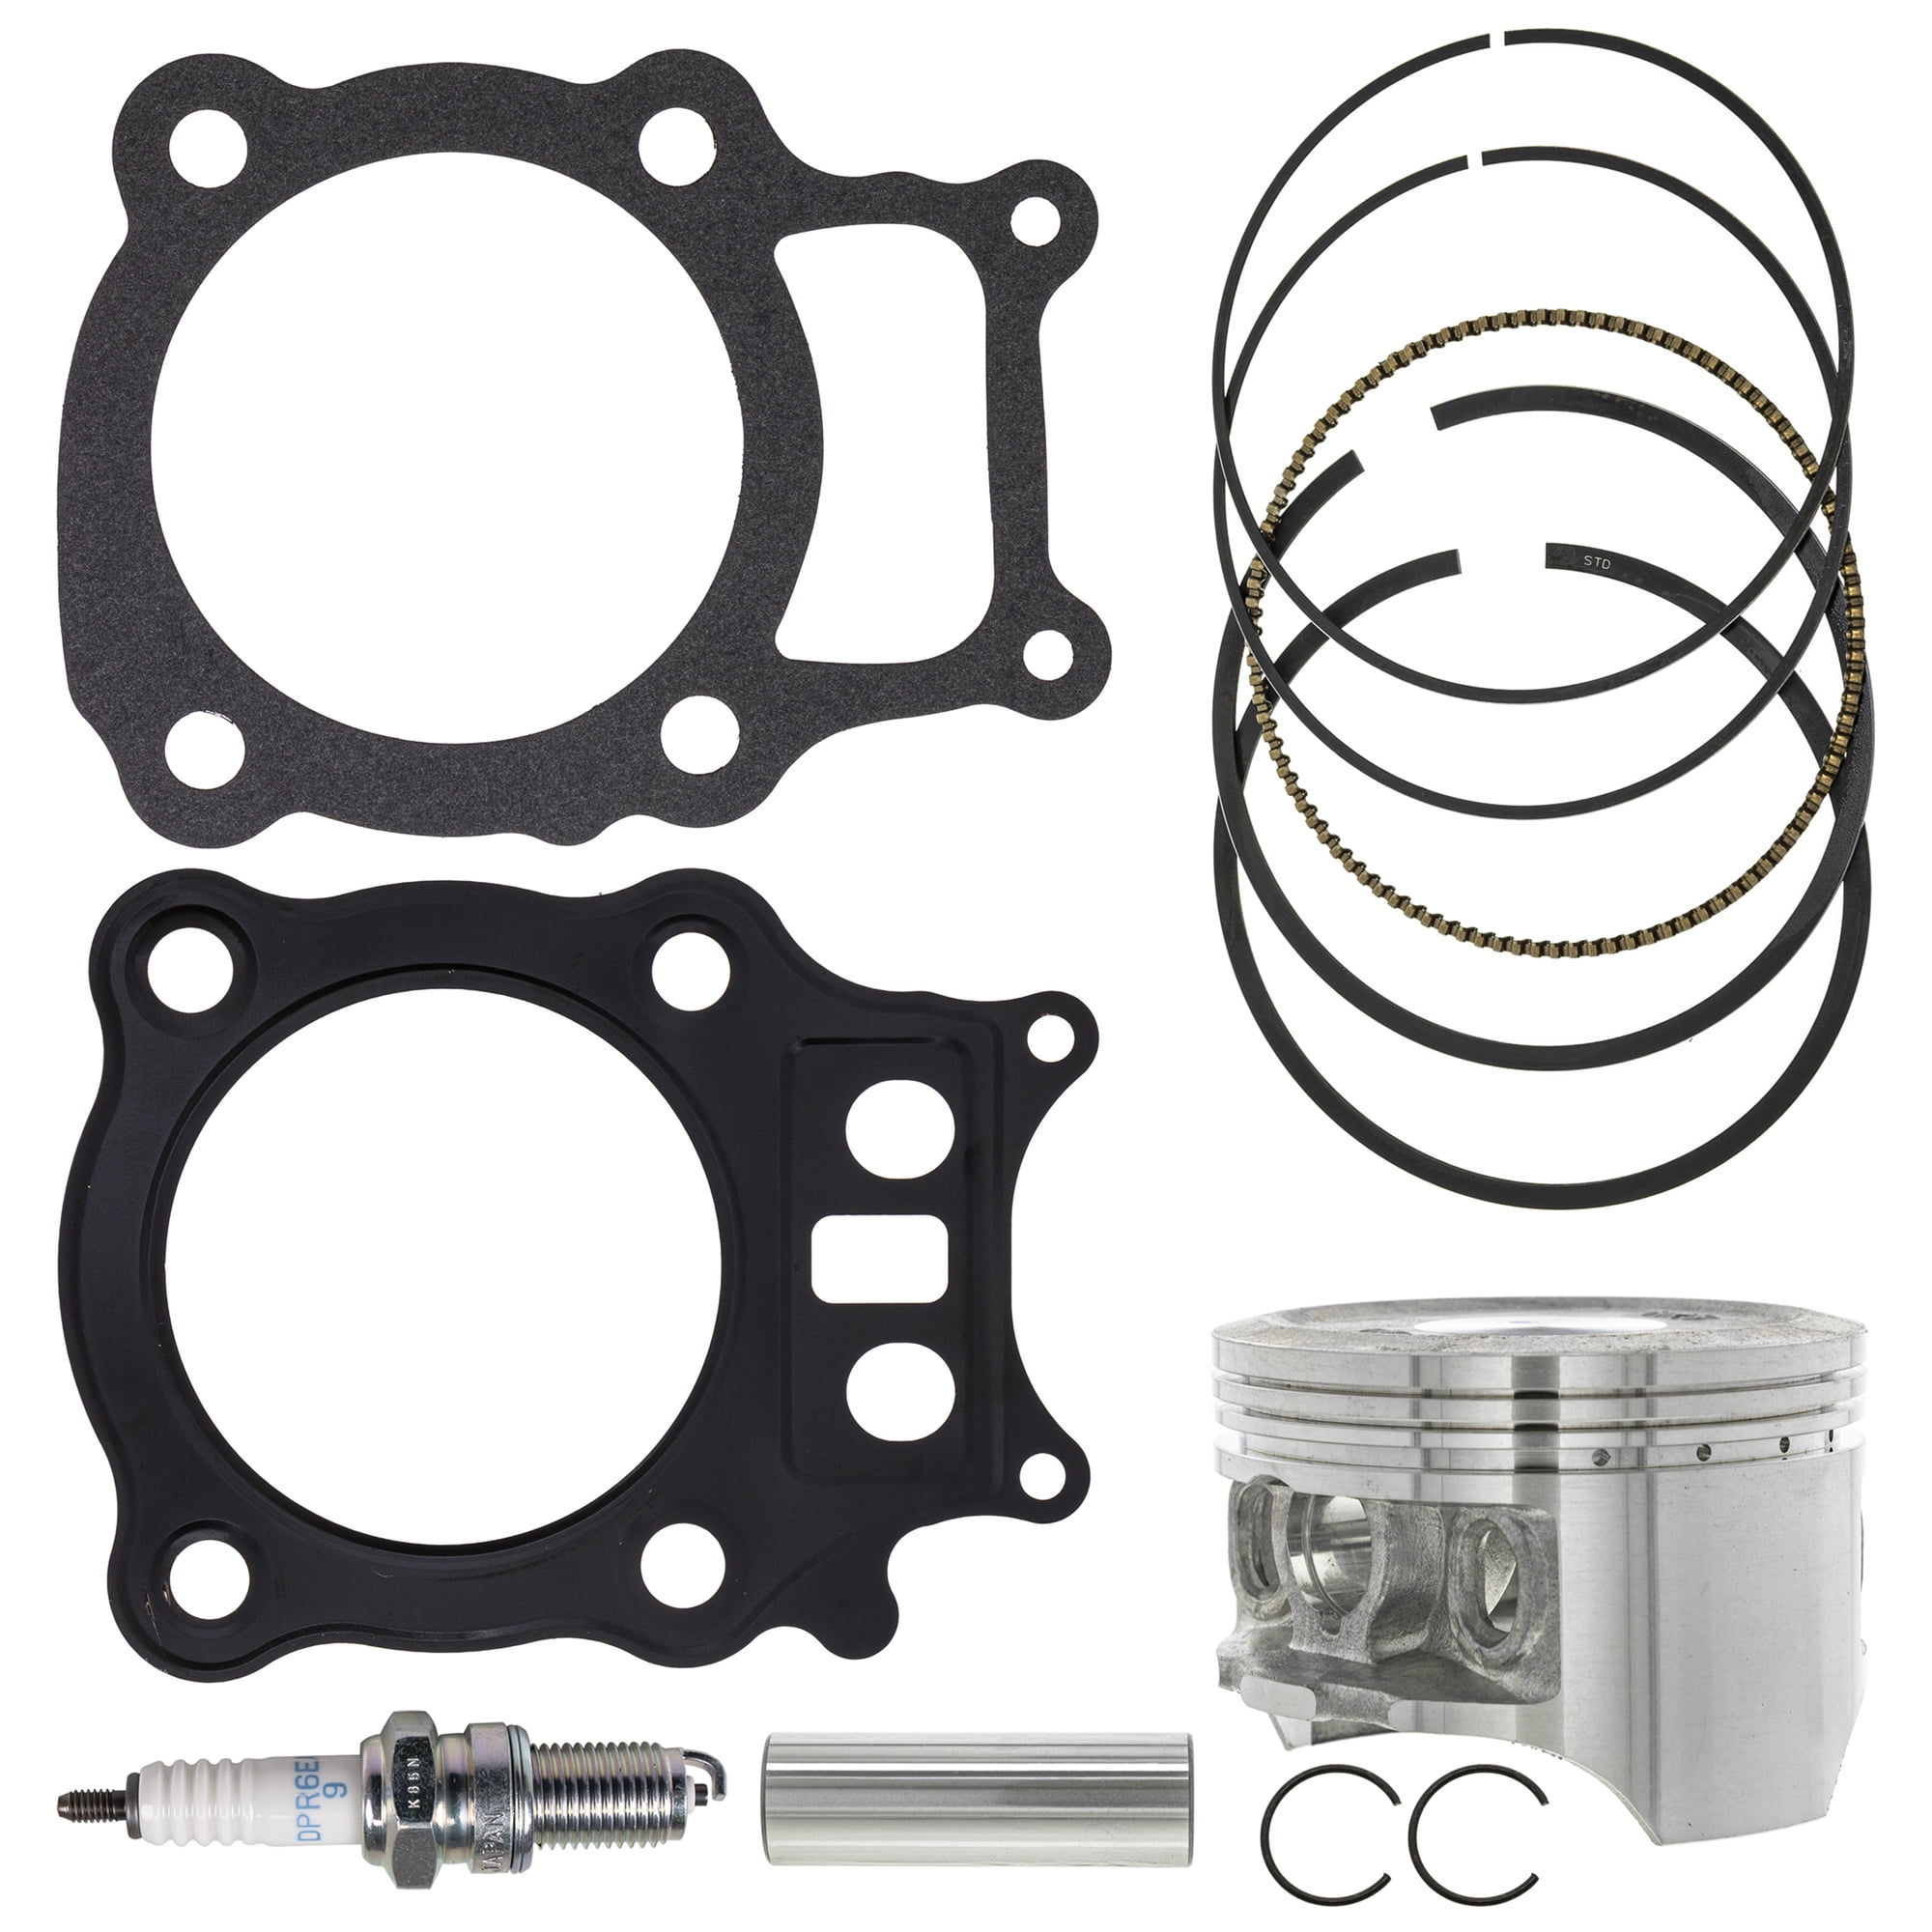 02-06 Vertex Top End Piston Kit Compatible with/Replacement for Honda CRF 450 R VTKTC23003A 